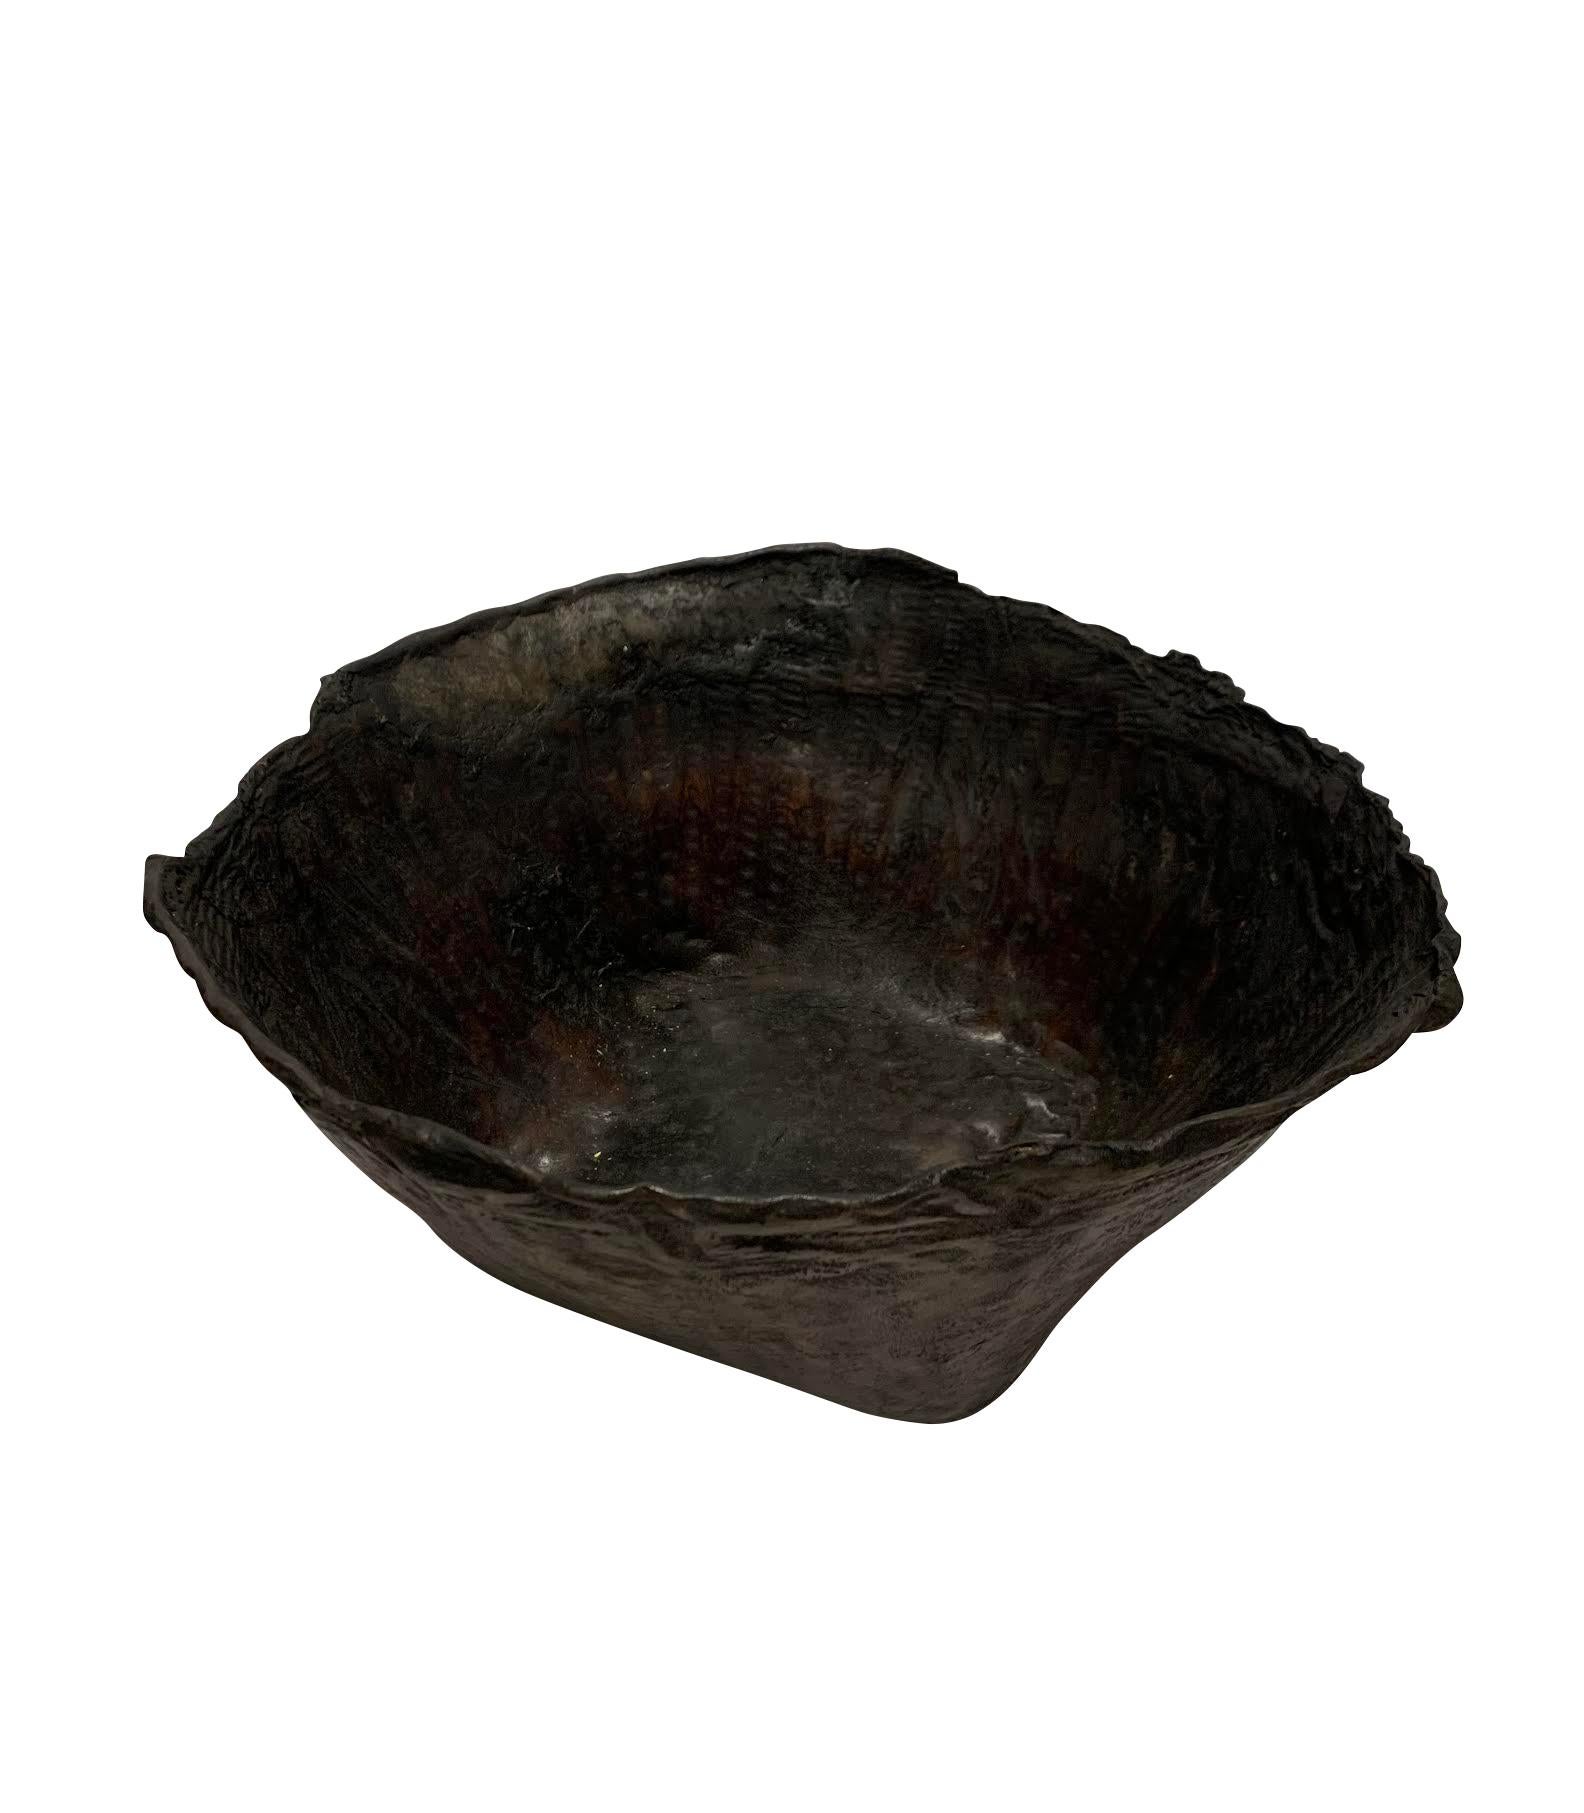 1940's Borneo bowl made from dried buffalo skin.
Stretched and formed in shape of large bowl.
Larger size available (S6574)